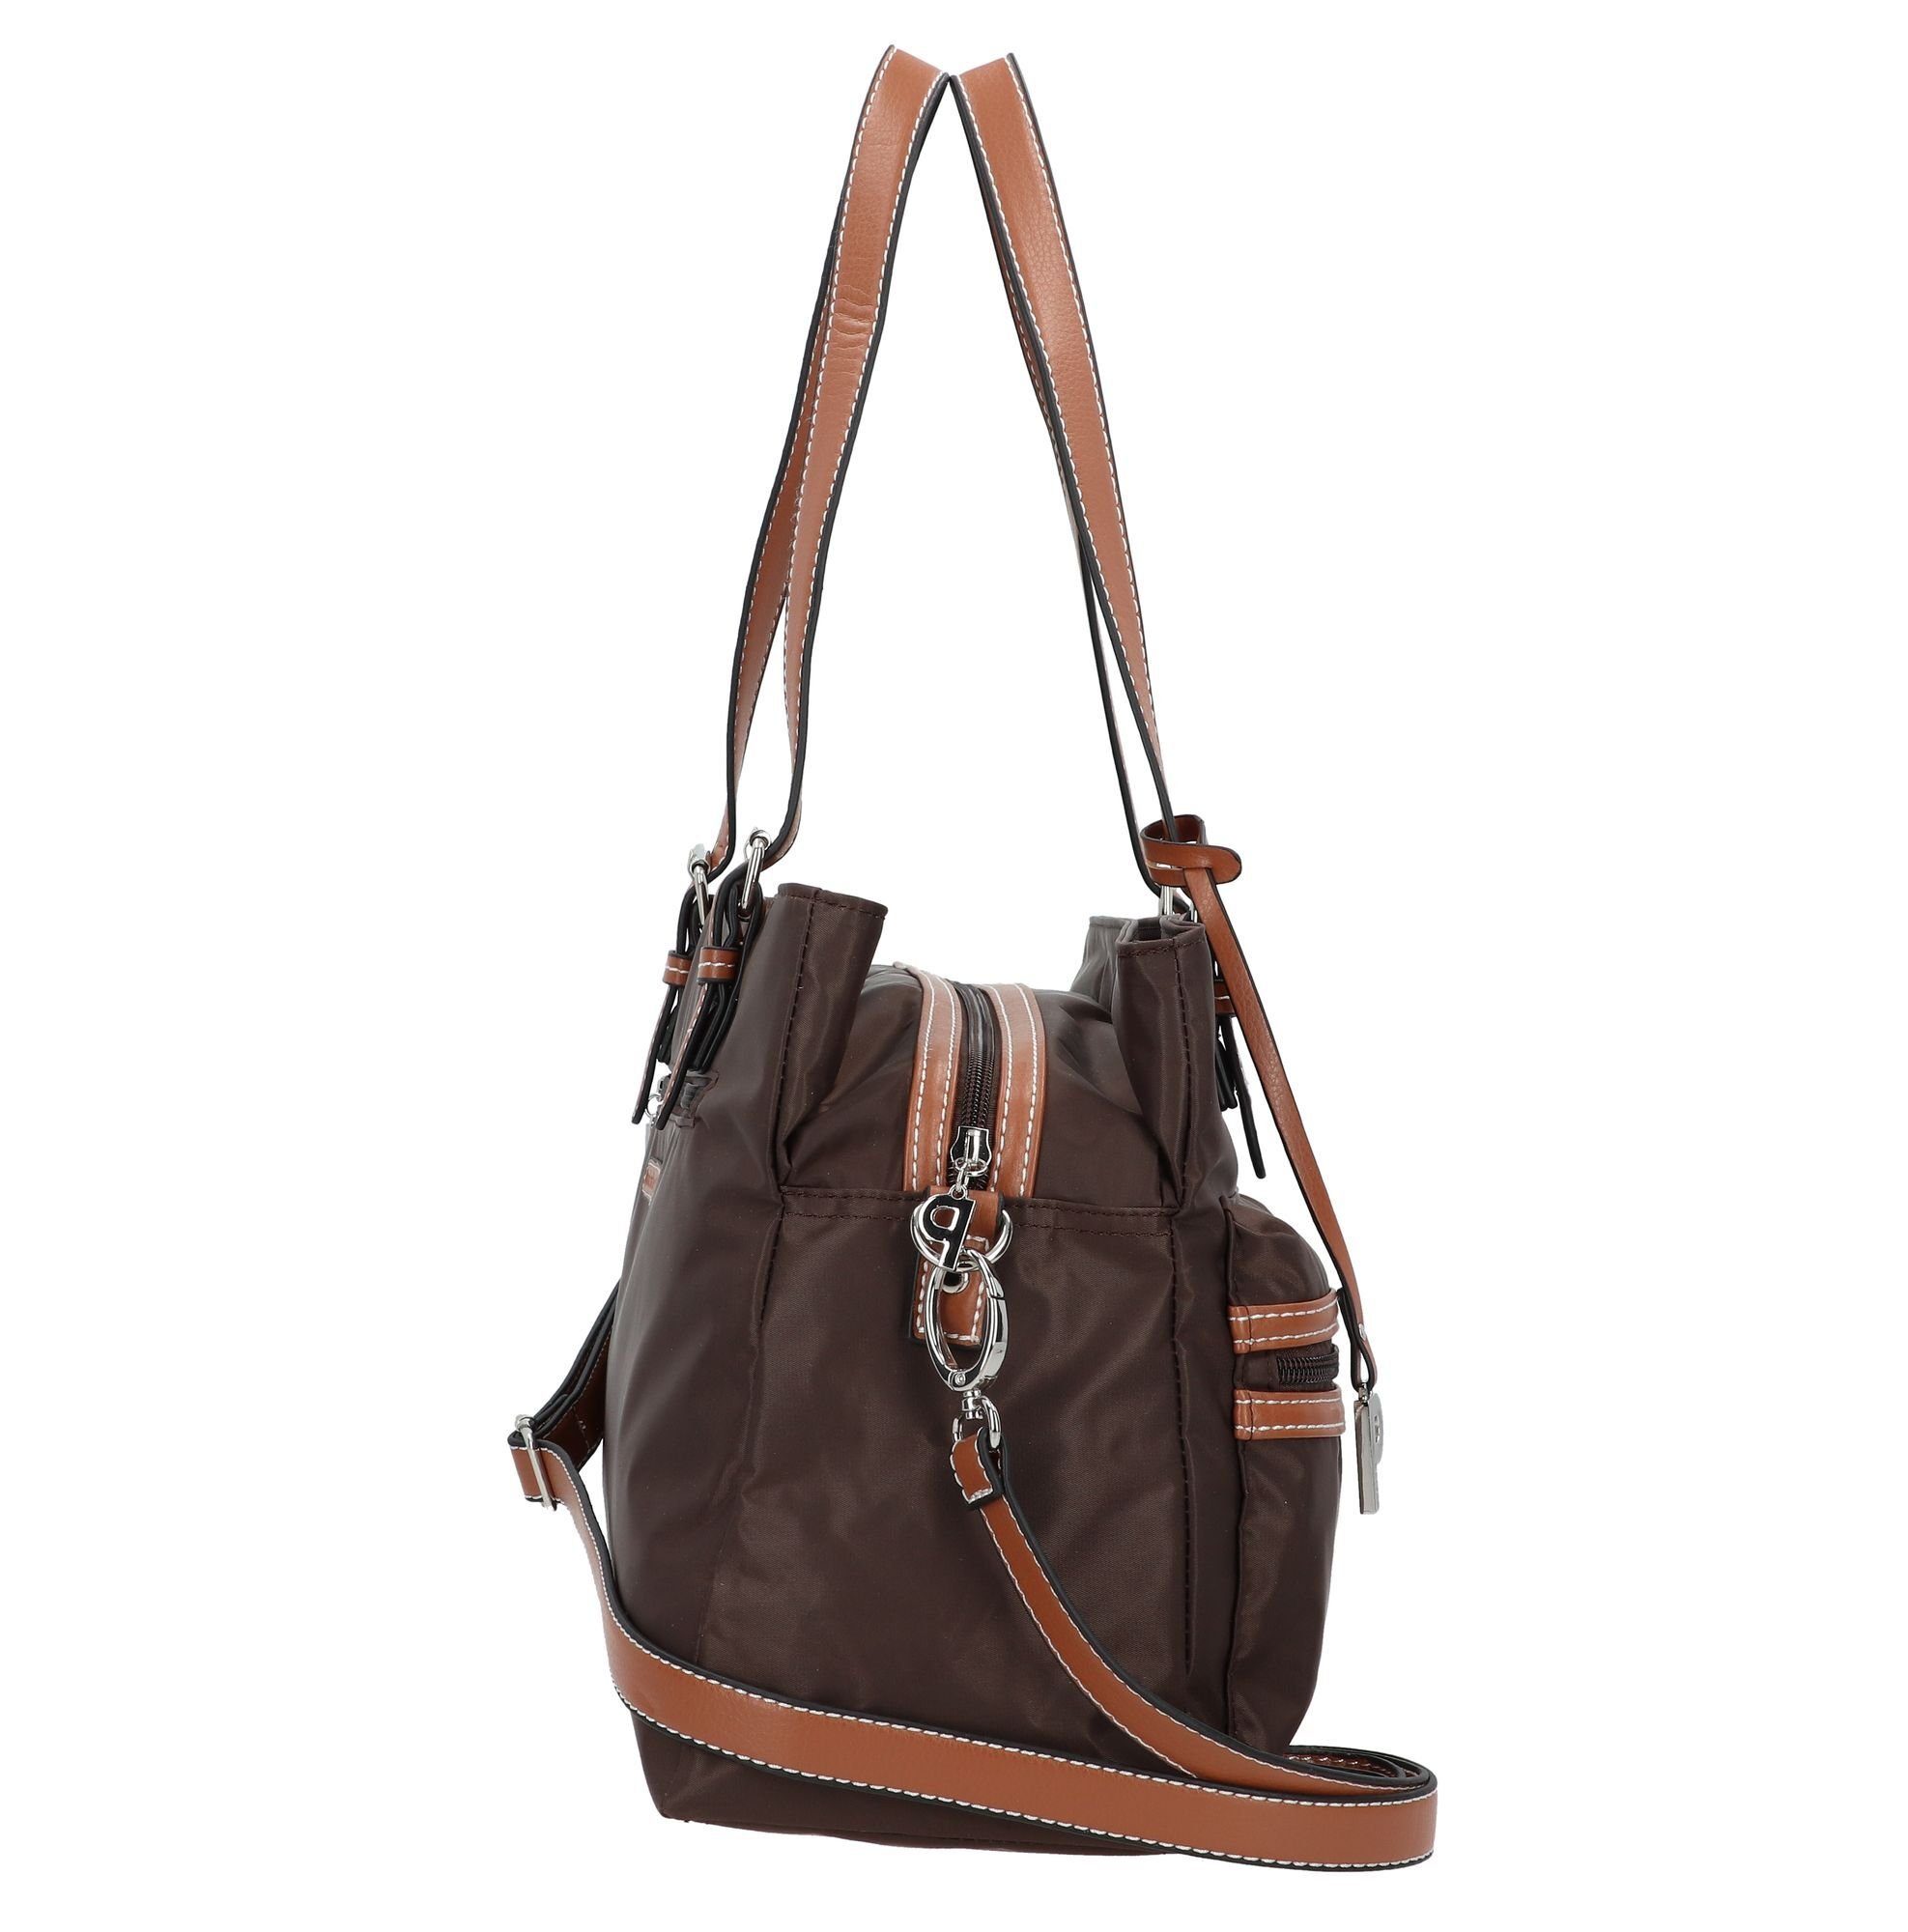 Picard Schultertasche Polyester Sonja, cafe